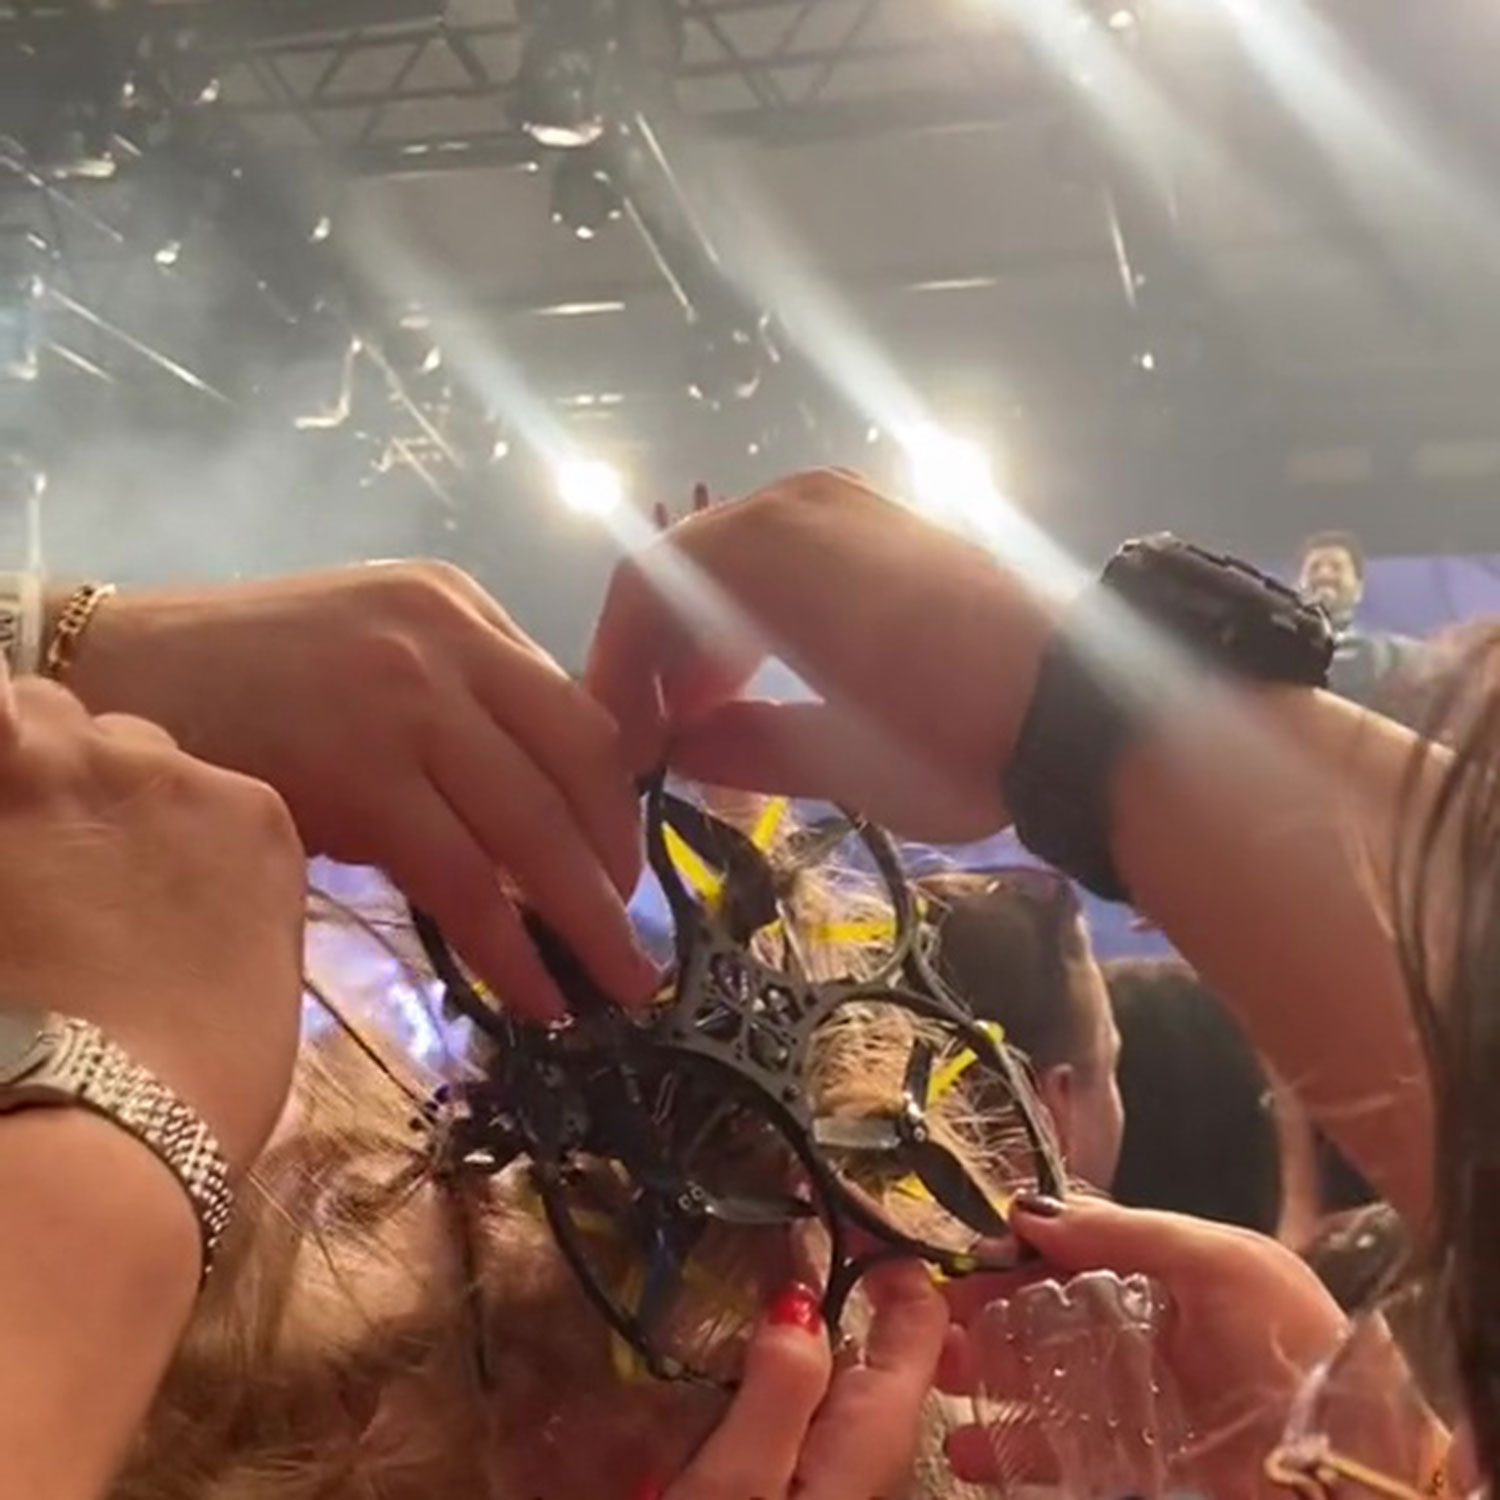 Video grab, A woman has a drone tangled in her hair during Alok's DJ concert.